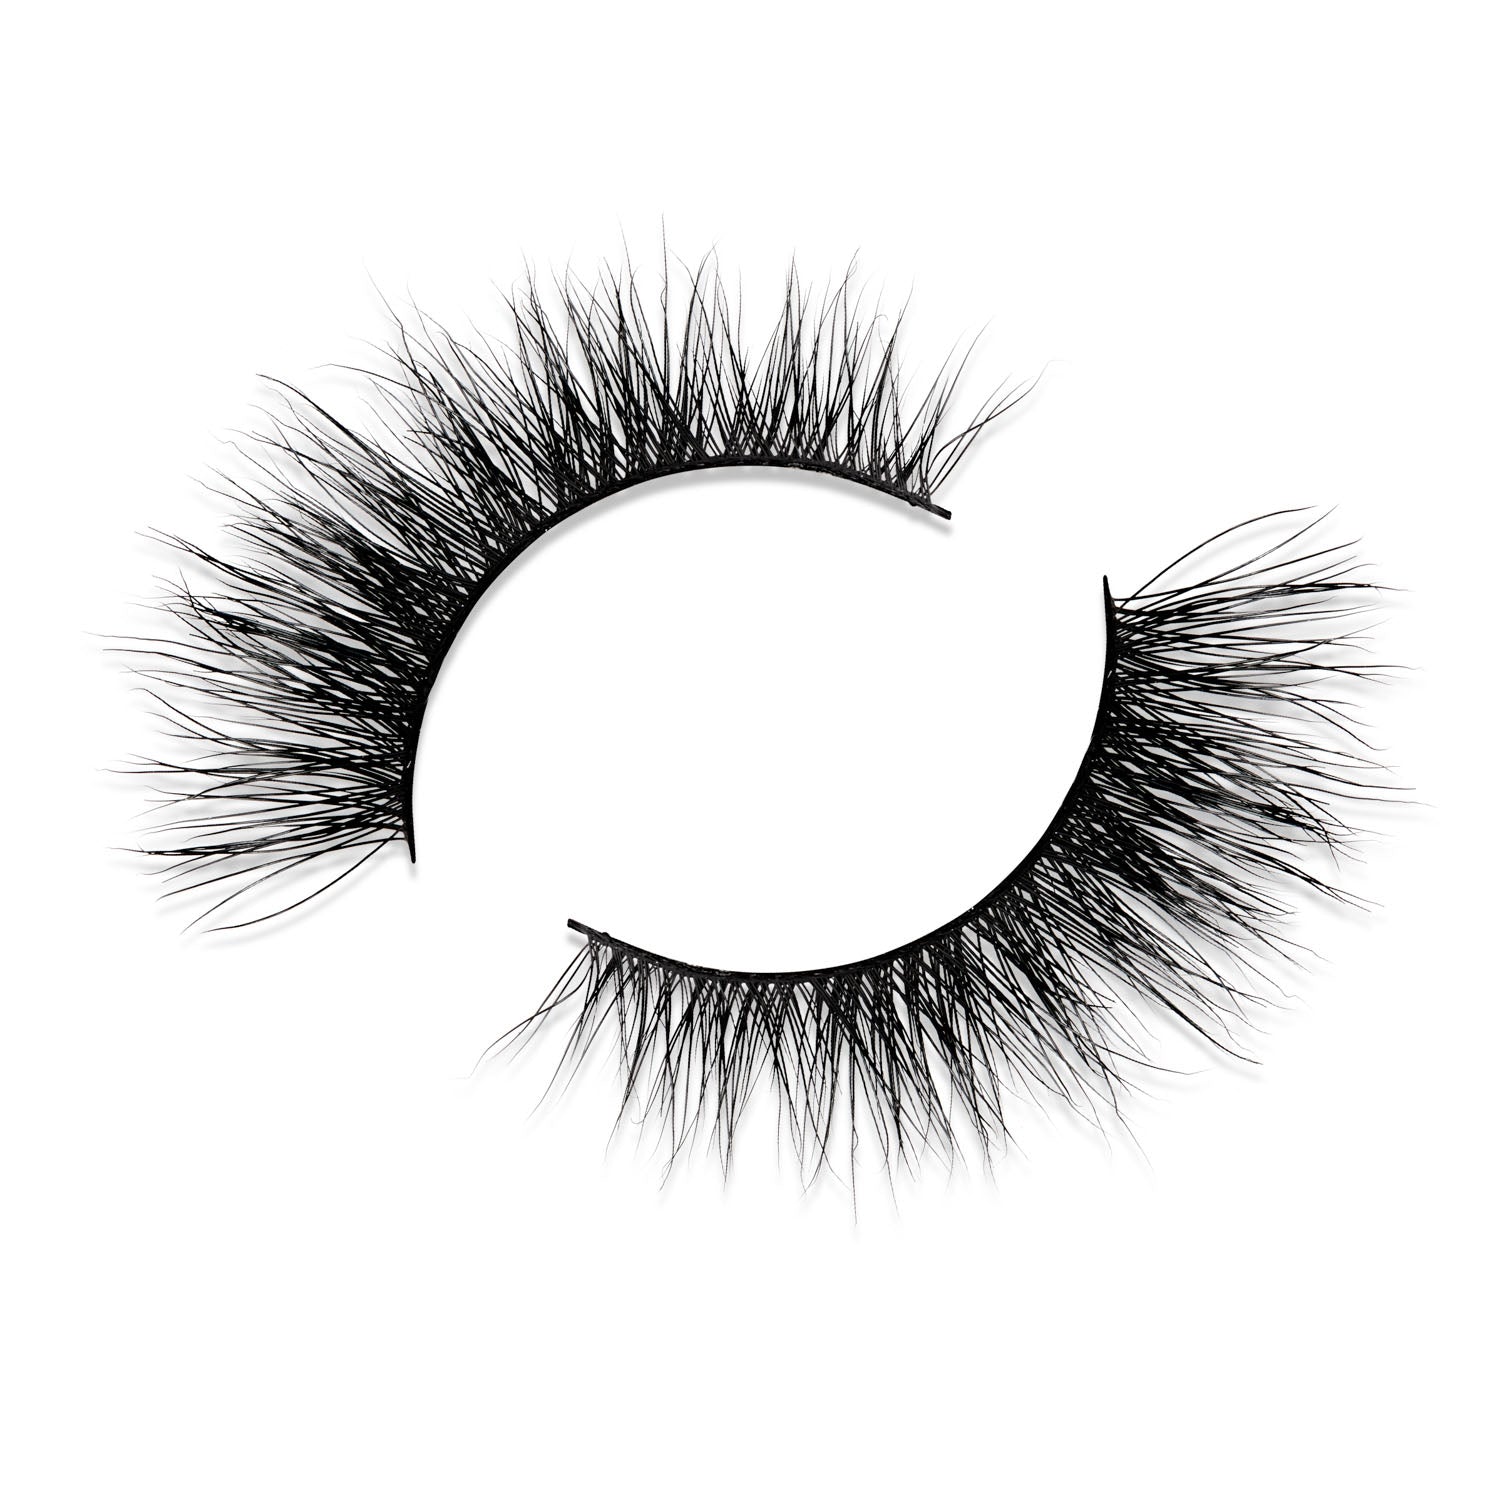 Luxury Mink strip Lashes #For Real